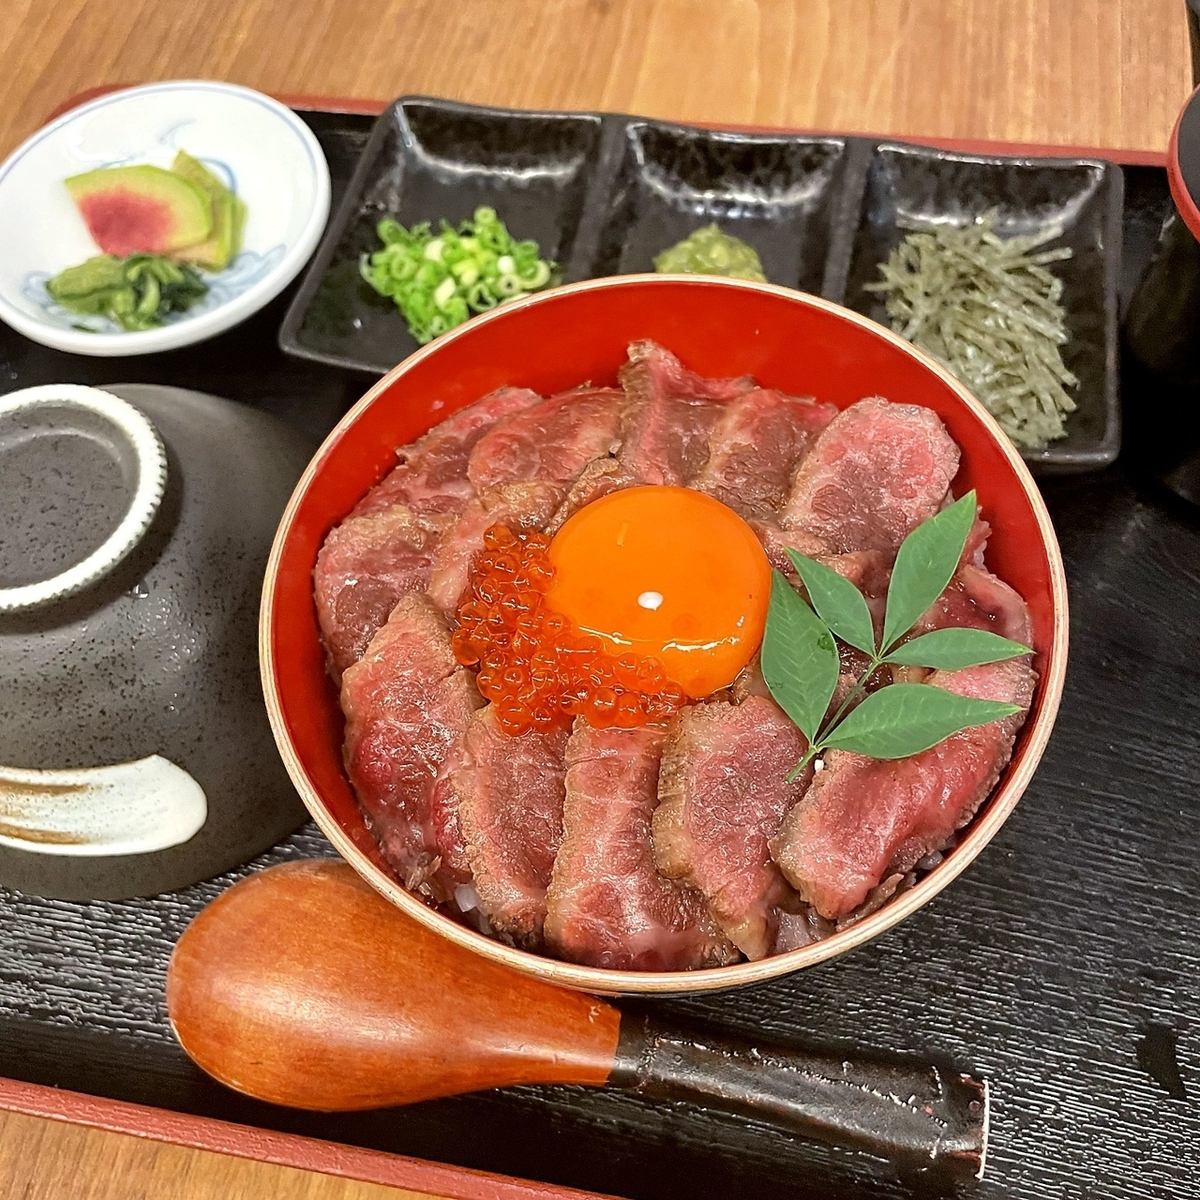 A restaurant where you can enjoy specialty dishes made with Wagyu beef and oysters, Japanese sake and Hiroshima Teppanyaki.